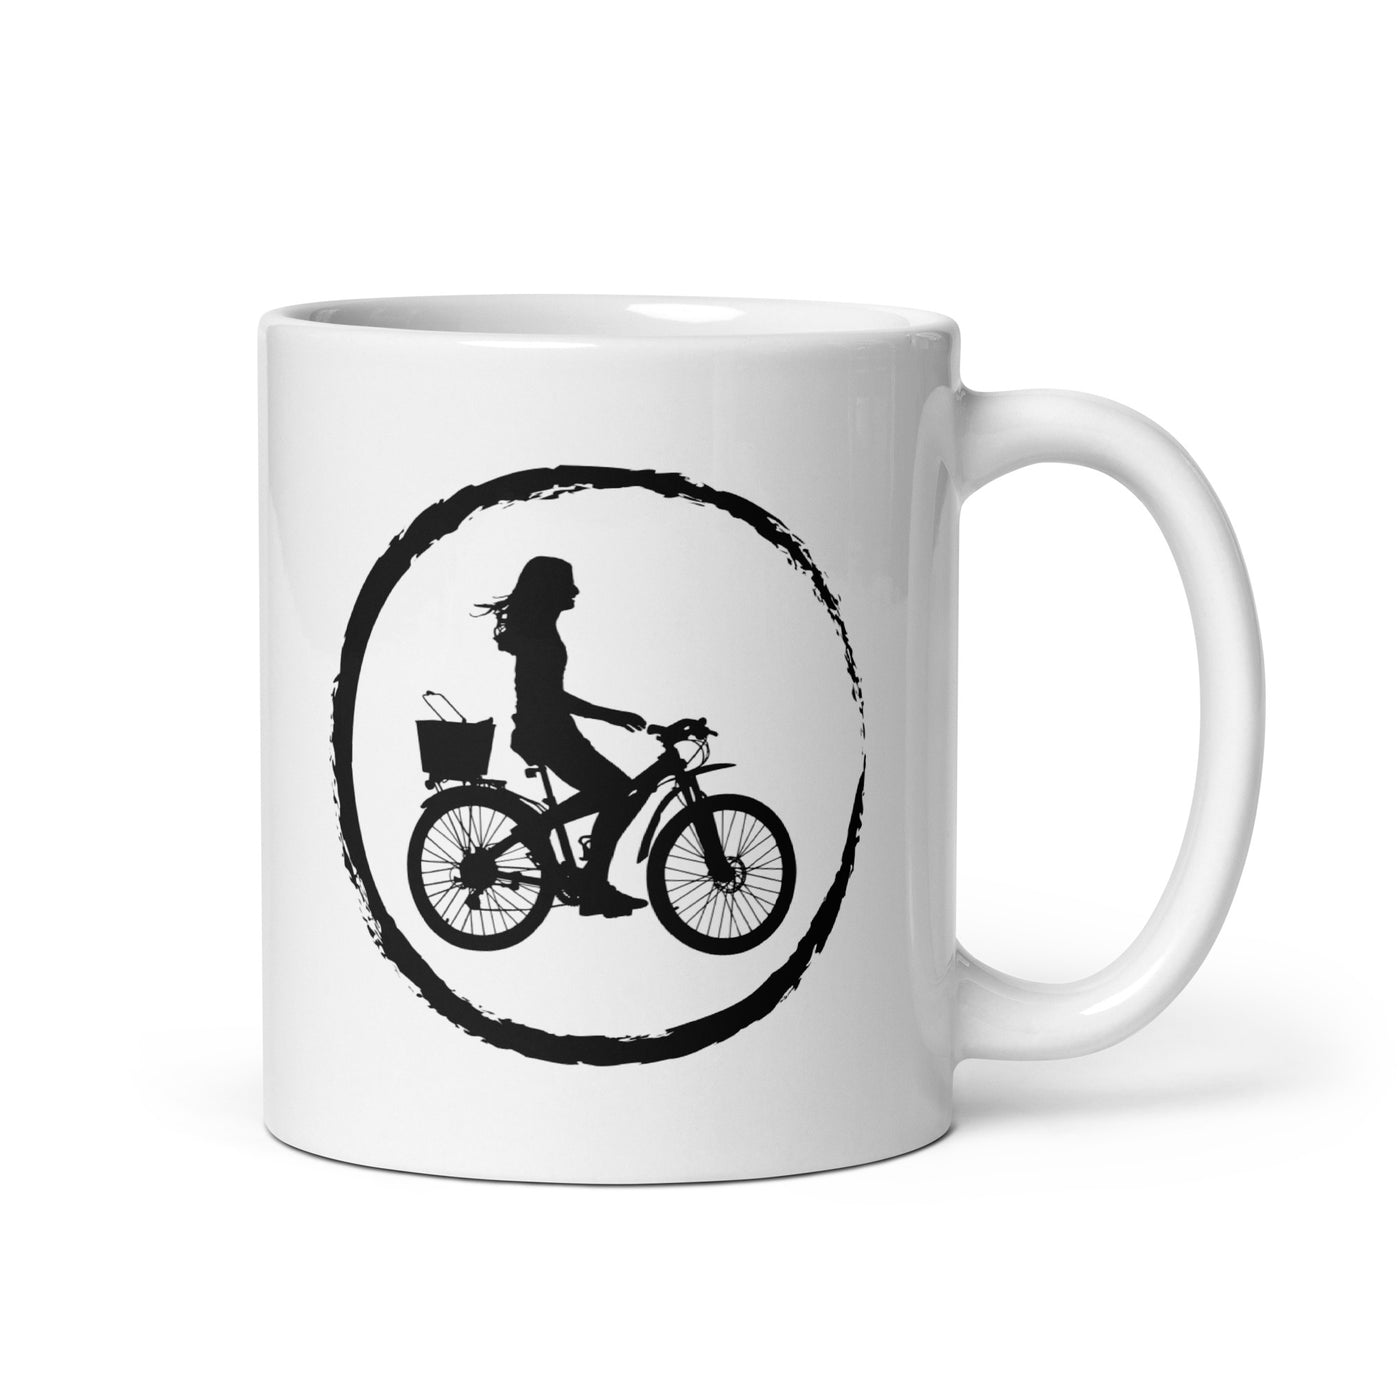 Cricle And Cycling - Tasse fahrrad